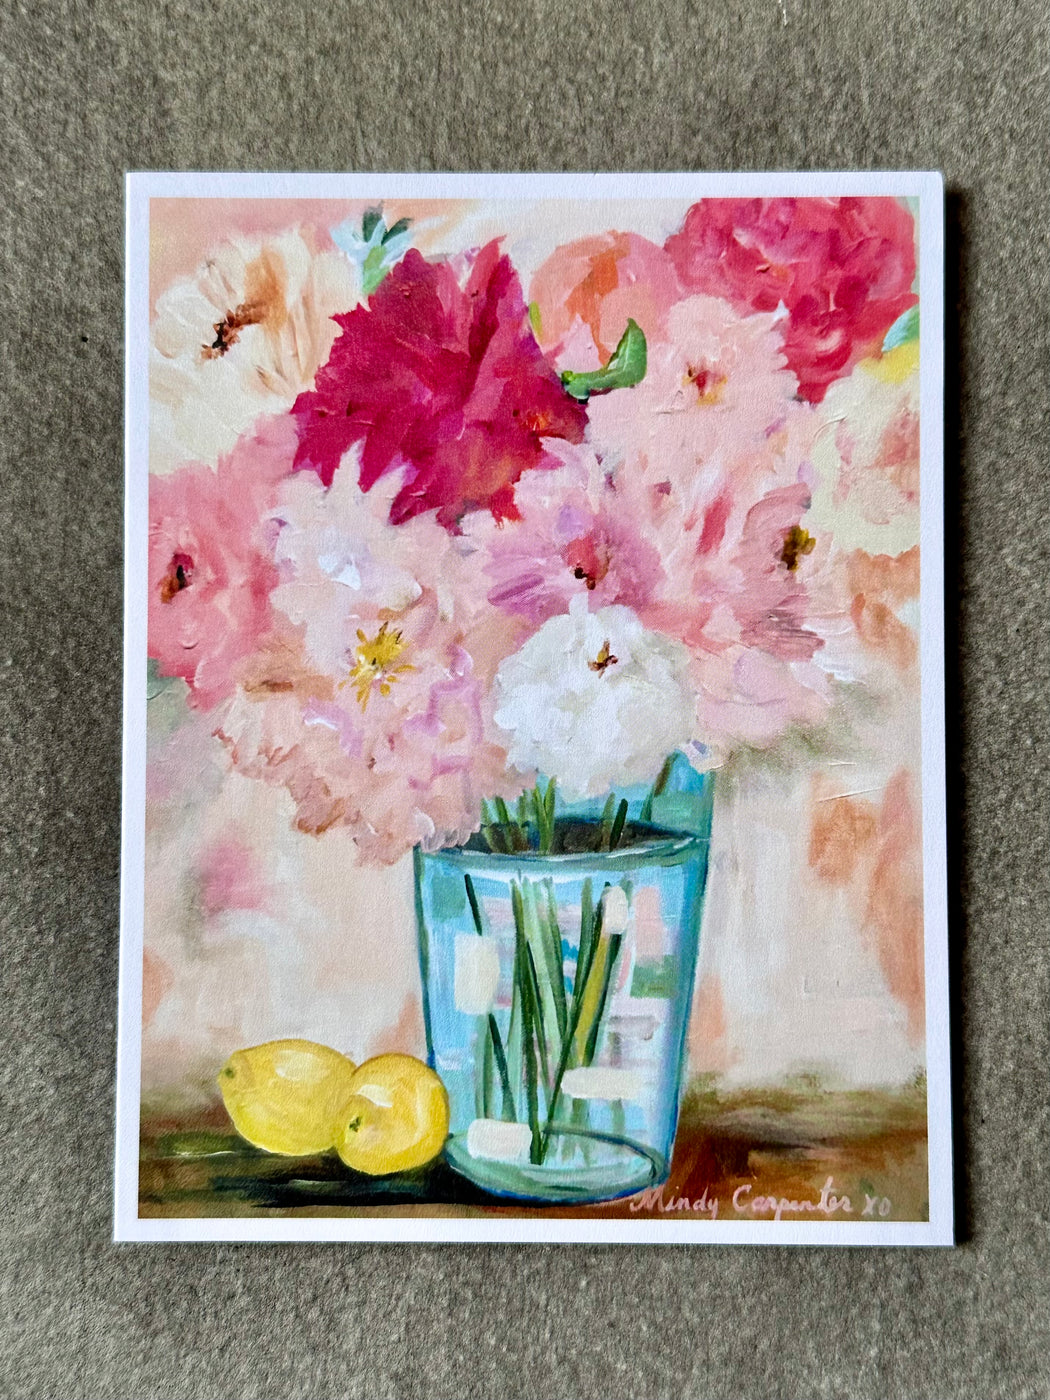 "Peonies" Card by Mindy Carpenter